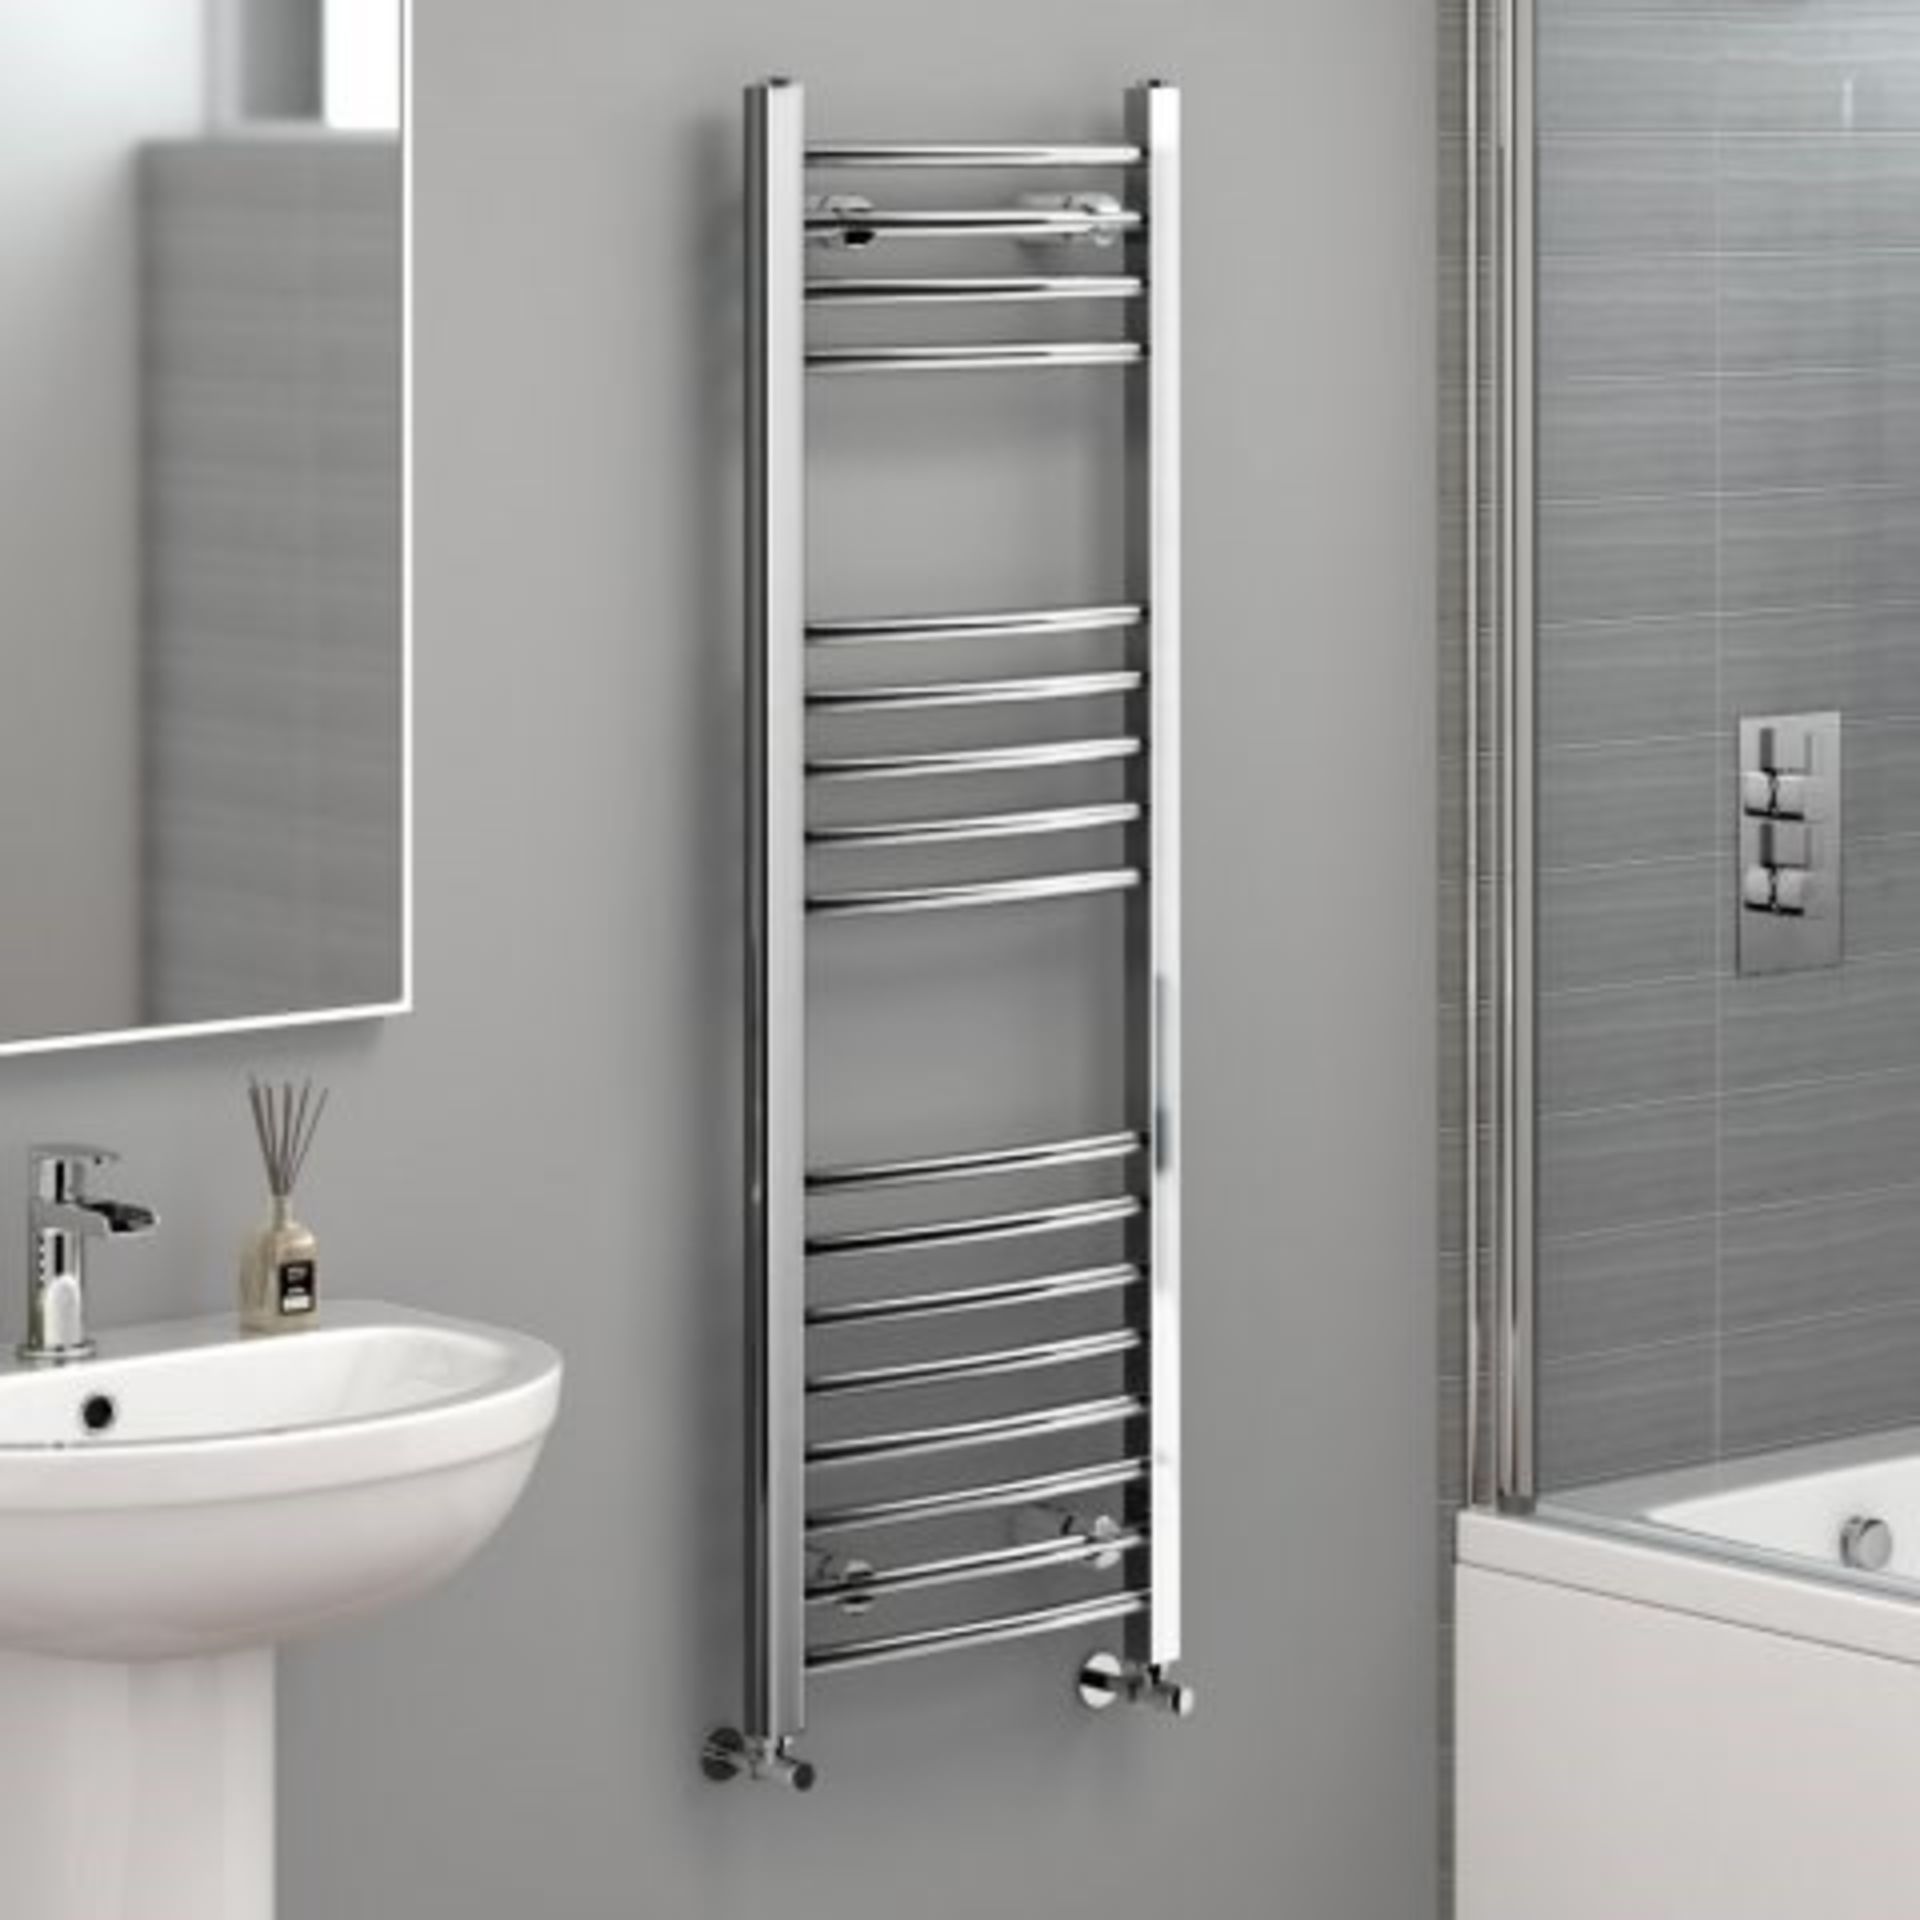 BRAND NEW BOXED 1200x400mm - 20mm Tubes - Chrome Curved Rail Ladder Towel Radiator. NC1200400.Our